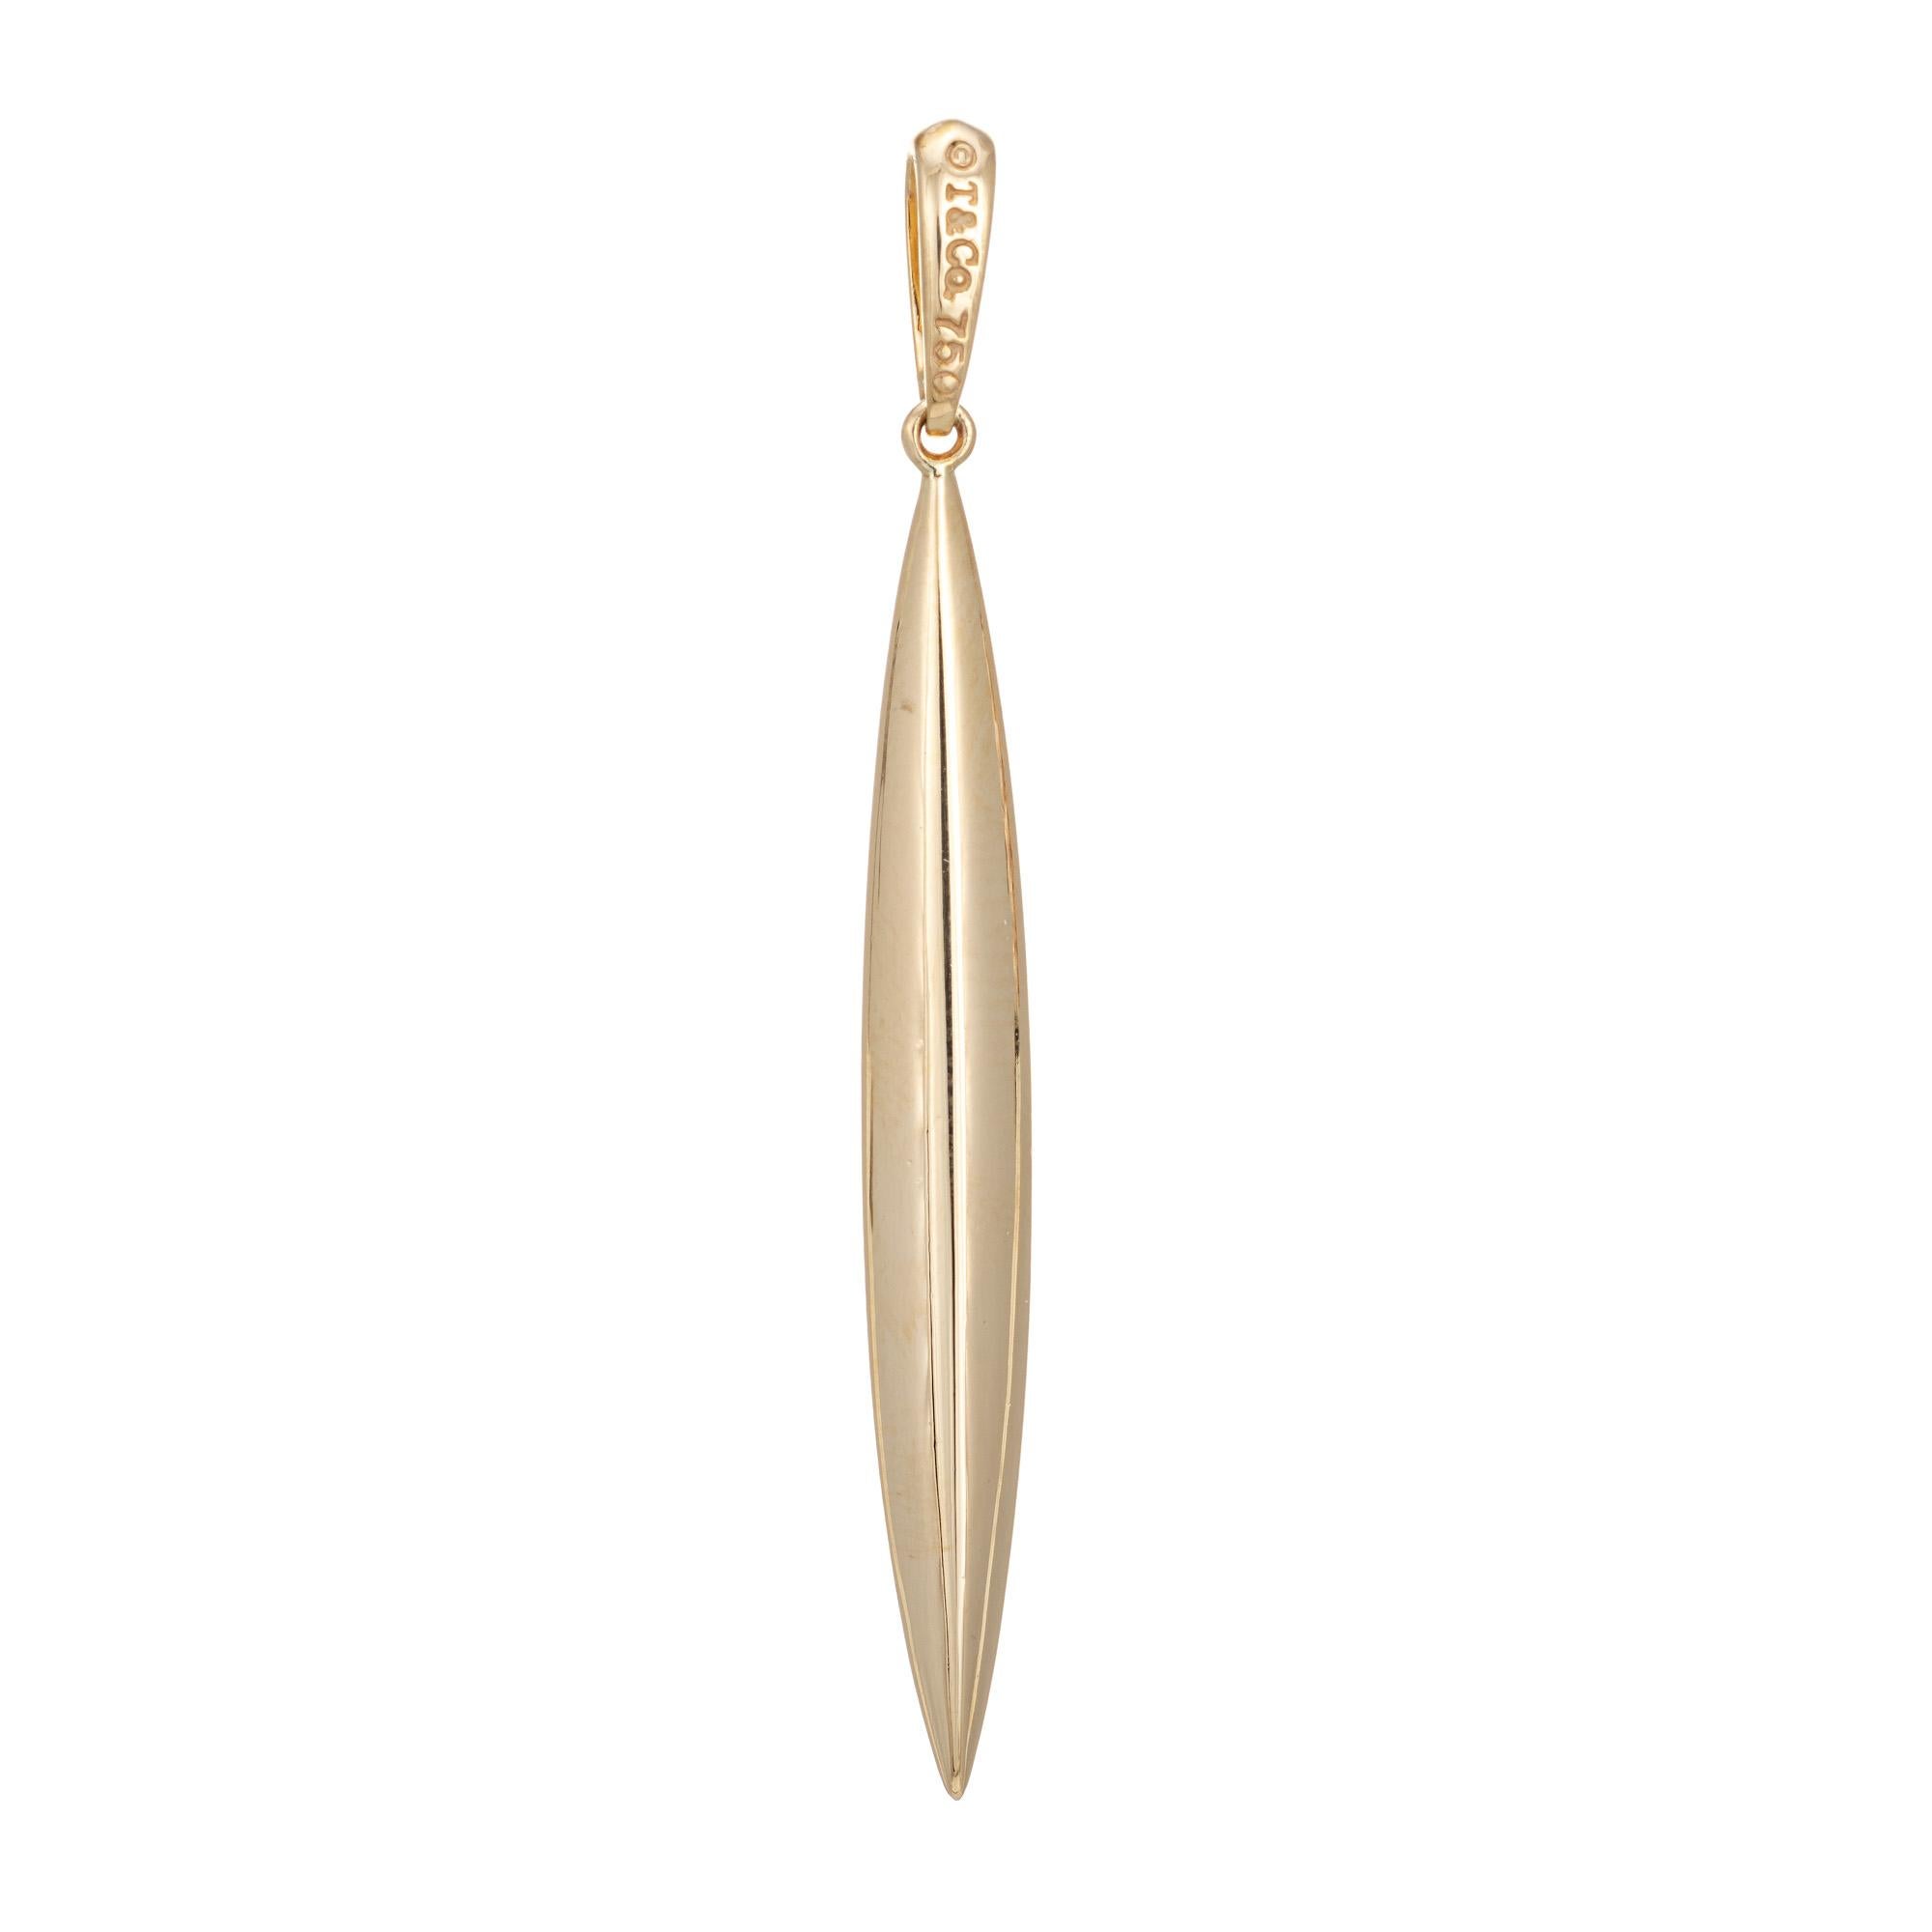 Finely detailed vintage Tiffany & Co feather pendant crafted in 18 karat yellow gold.  

The pendant is a hard-to-find retired piece and no longer made by Tiffany & Co. Modeled in the form of a feather (can also been seen as a spike) the piece is